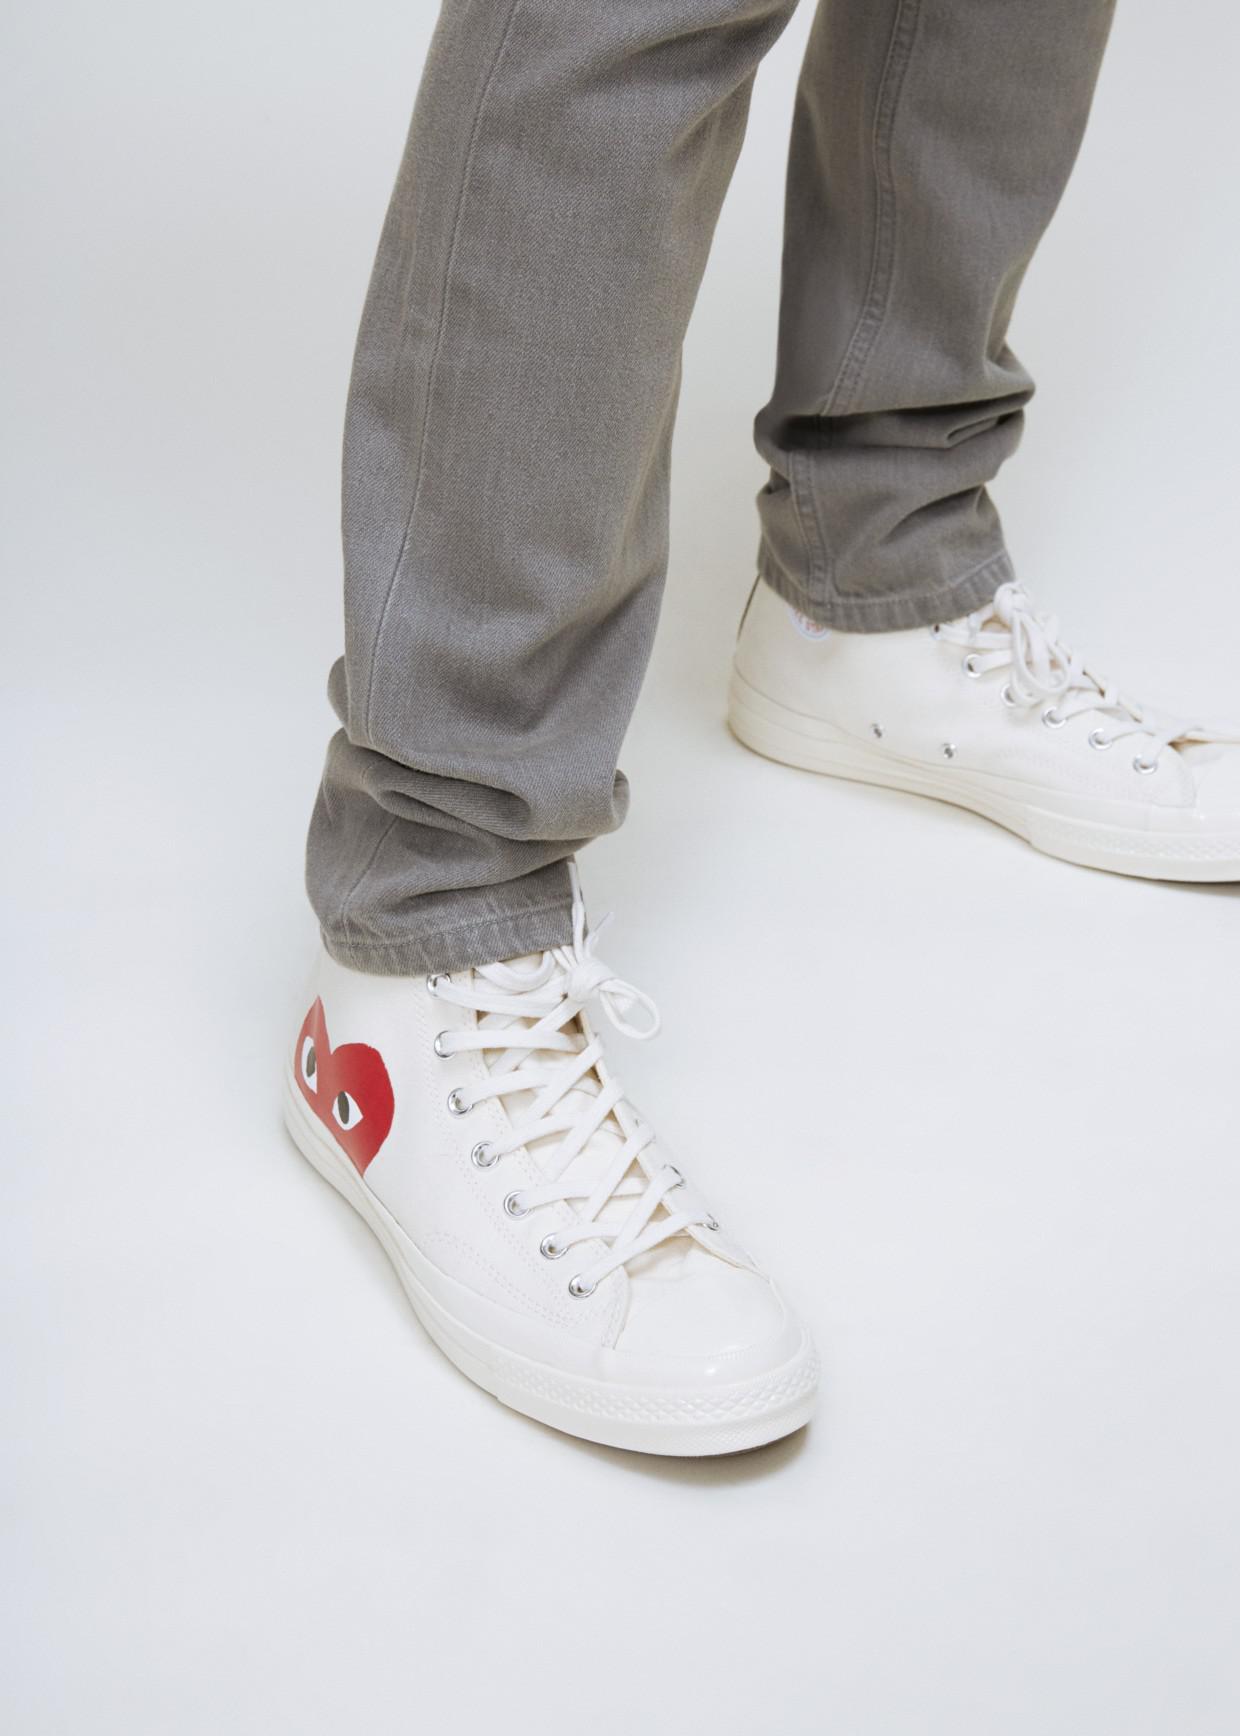 play comme des garcons converse sneakers